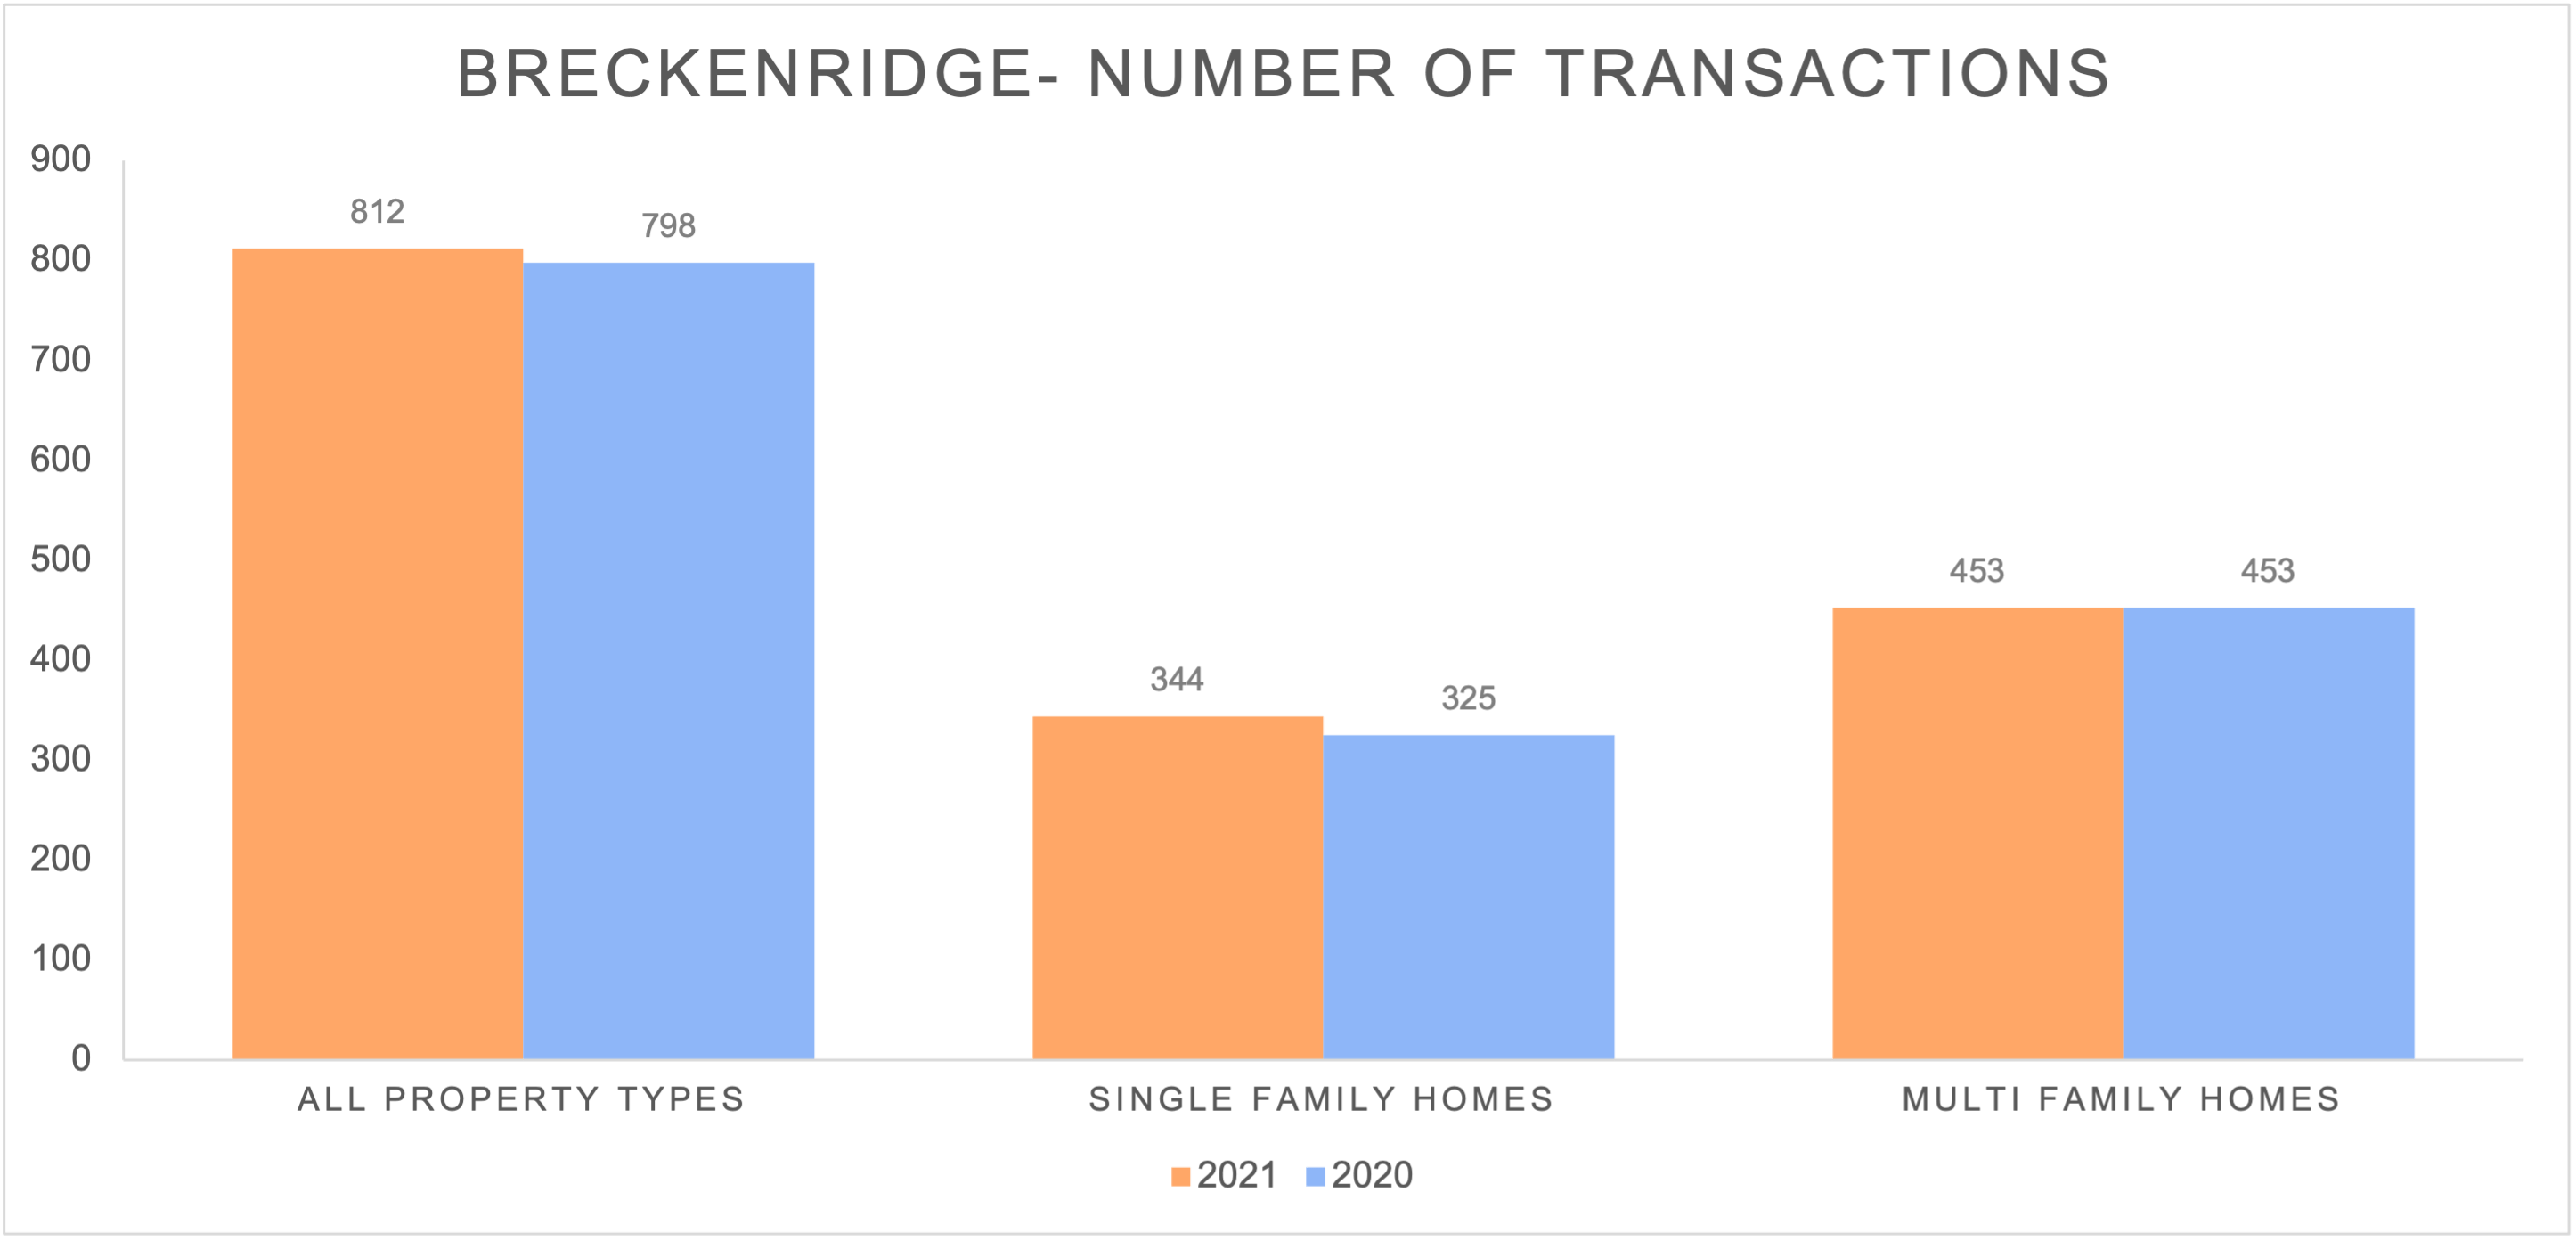 2021 Breckenridge Number of Transactions by Property Type